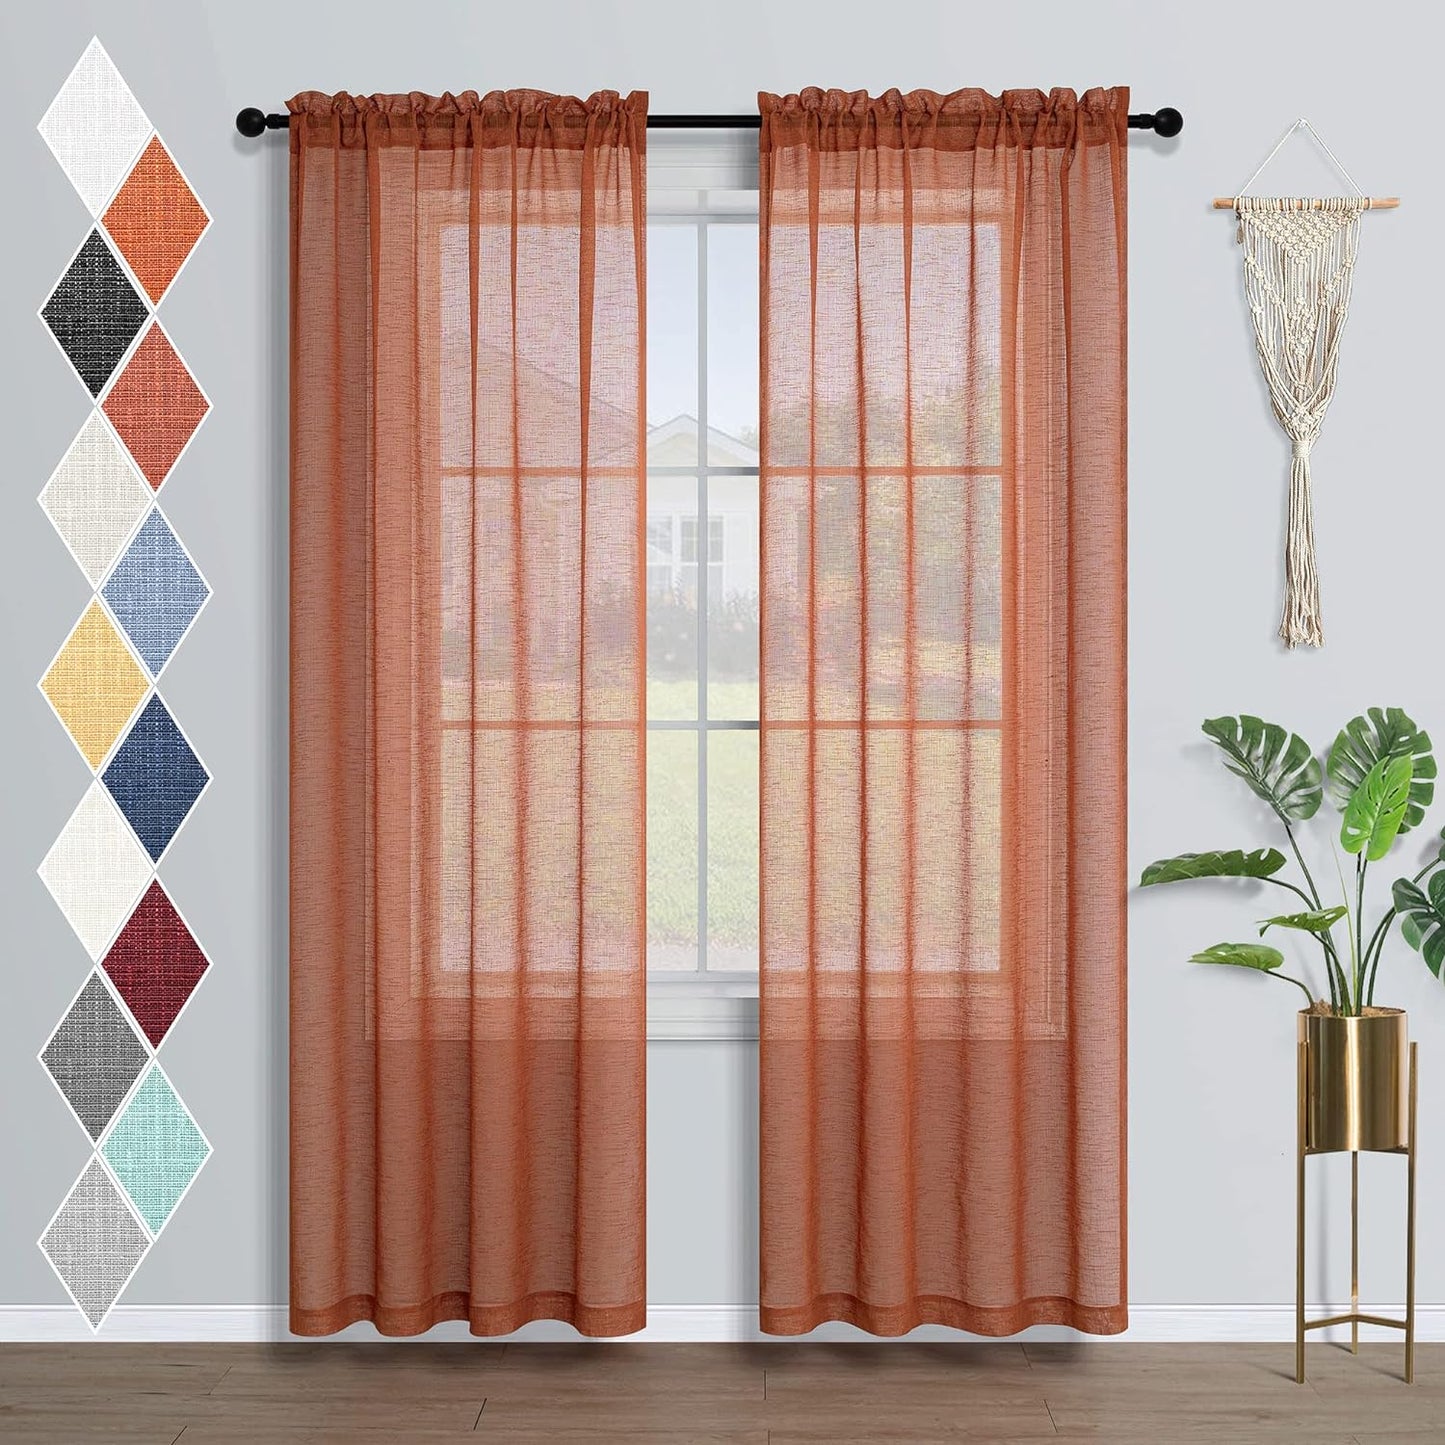 Burnt Orange Sheer Curtains 84 Inch Length for Bedroom 2 Panels Pumpkin Thanksgiving Day Rod Pocket Bohemian Semi Sheer Curtain Rustic Light Filtering Boho Curtains for Living Room 84 Inches Long  MRS.NATURALL TEXTILE Terracotta 38X84 